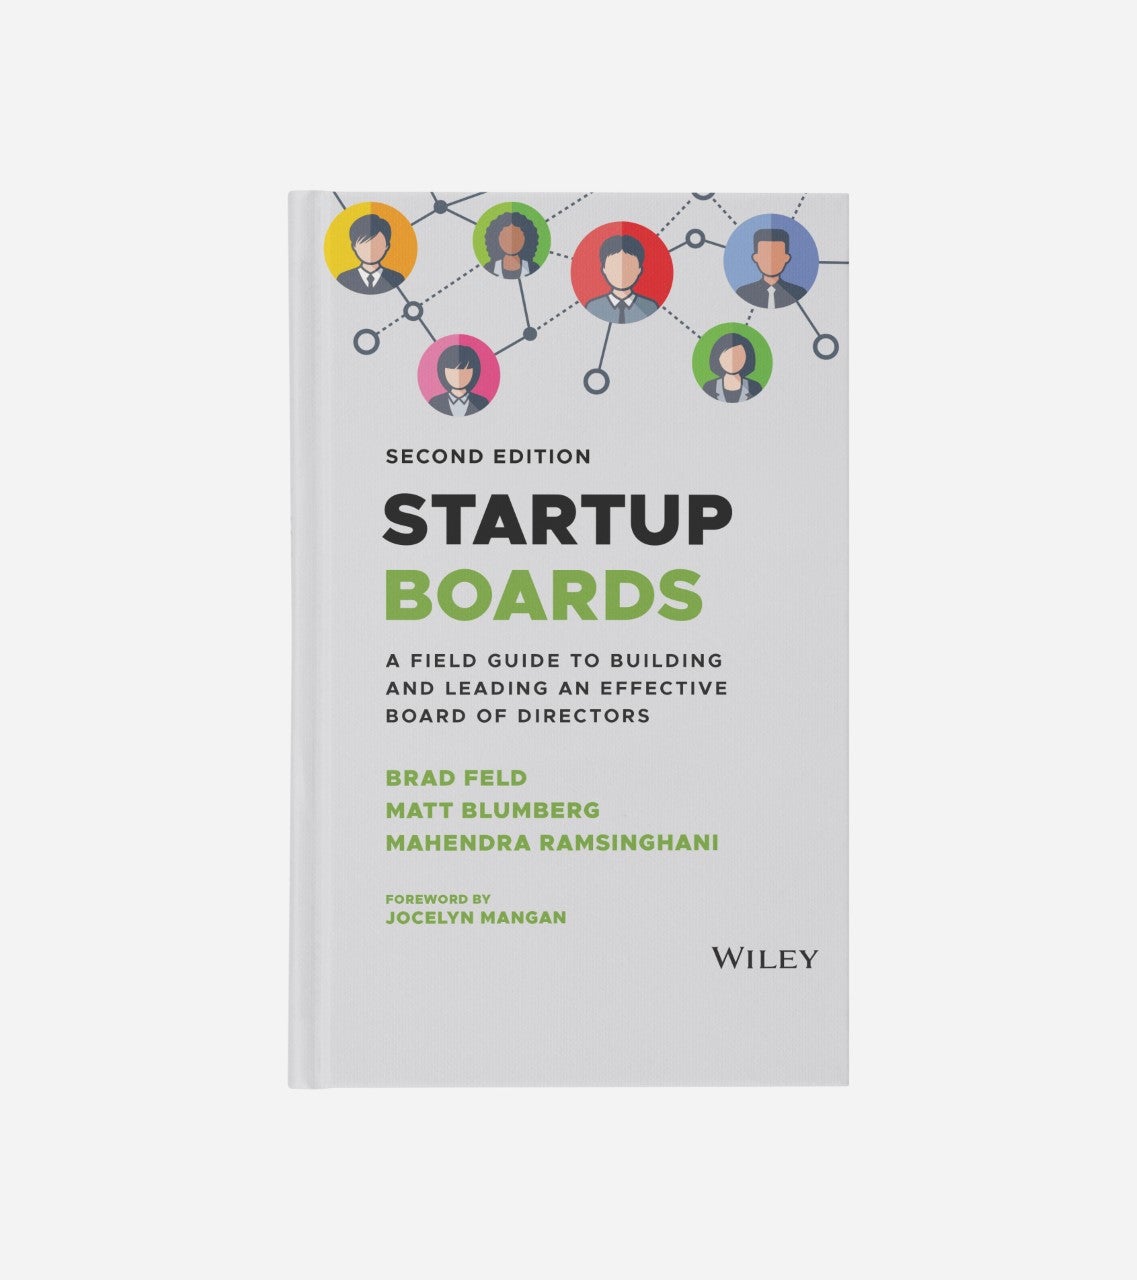 Book: Startup Boards, 2nd edition is available